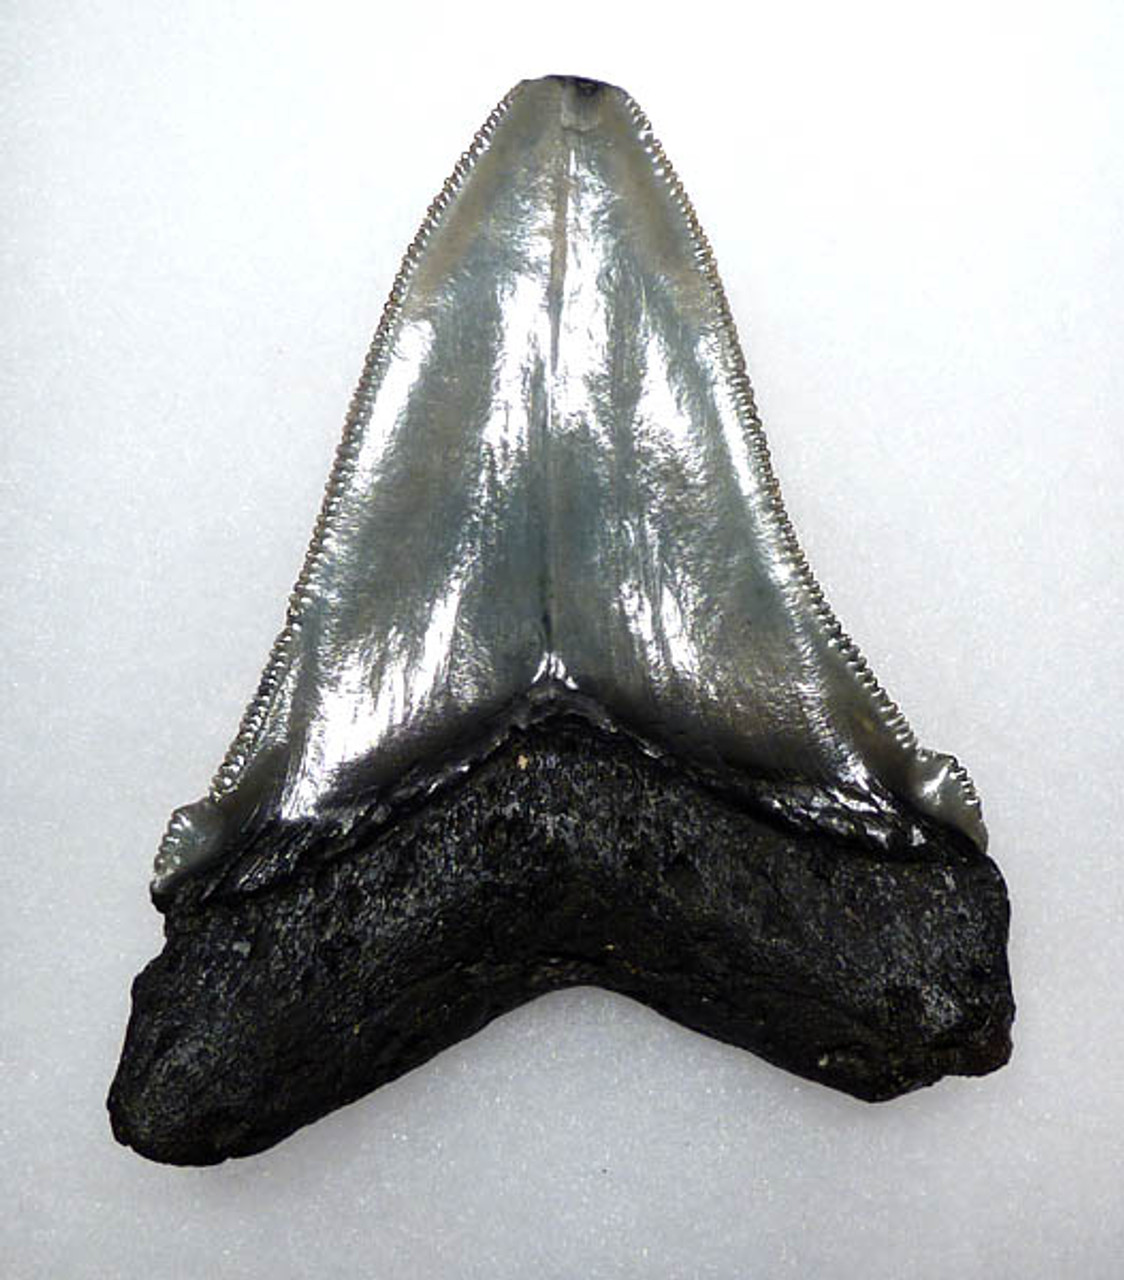 RARE SIZE LARGE 3.45 INCH FOSSIL ANGUSTIDENS SHARK TOOTH FROM THE USA *SHX018